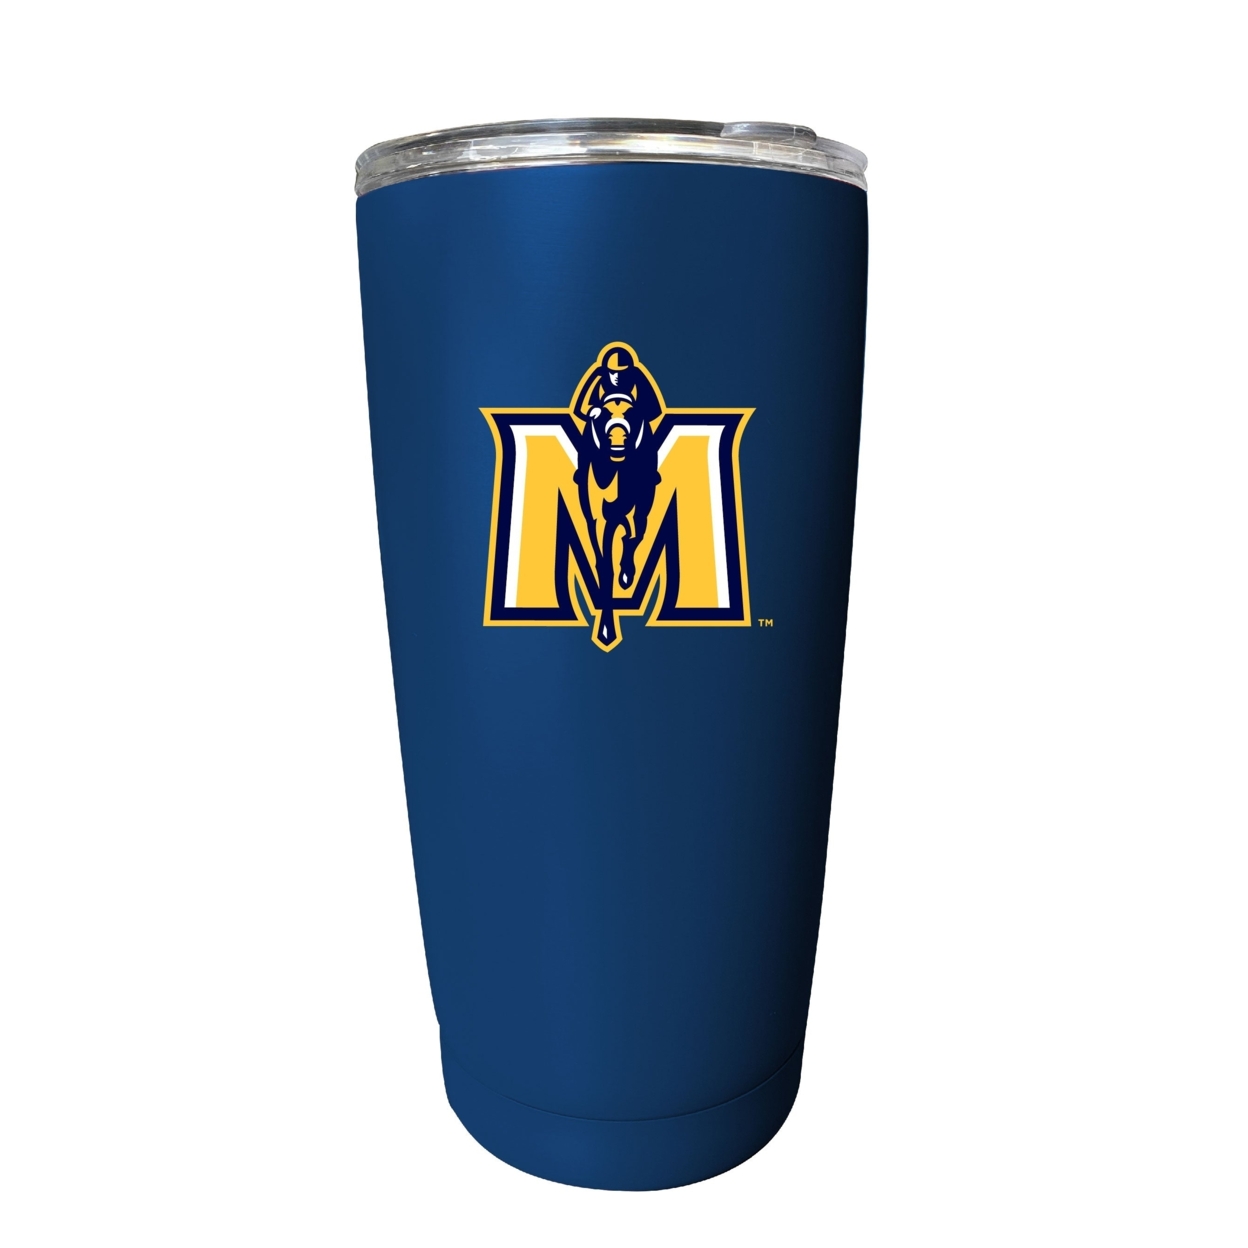 Murray State University 16 Oz Insulated Stainless Steel Tumbler Straight - Navy